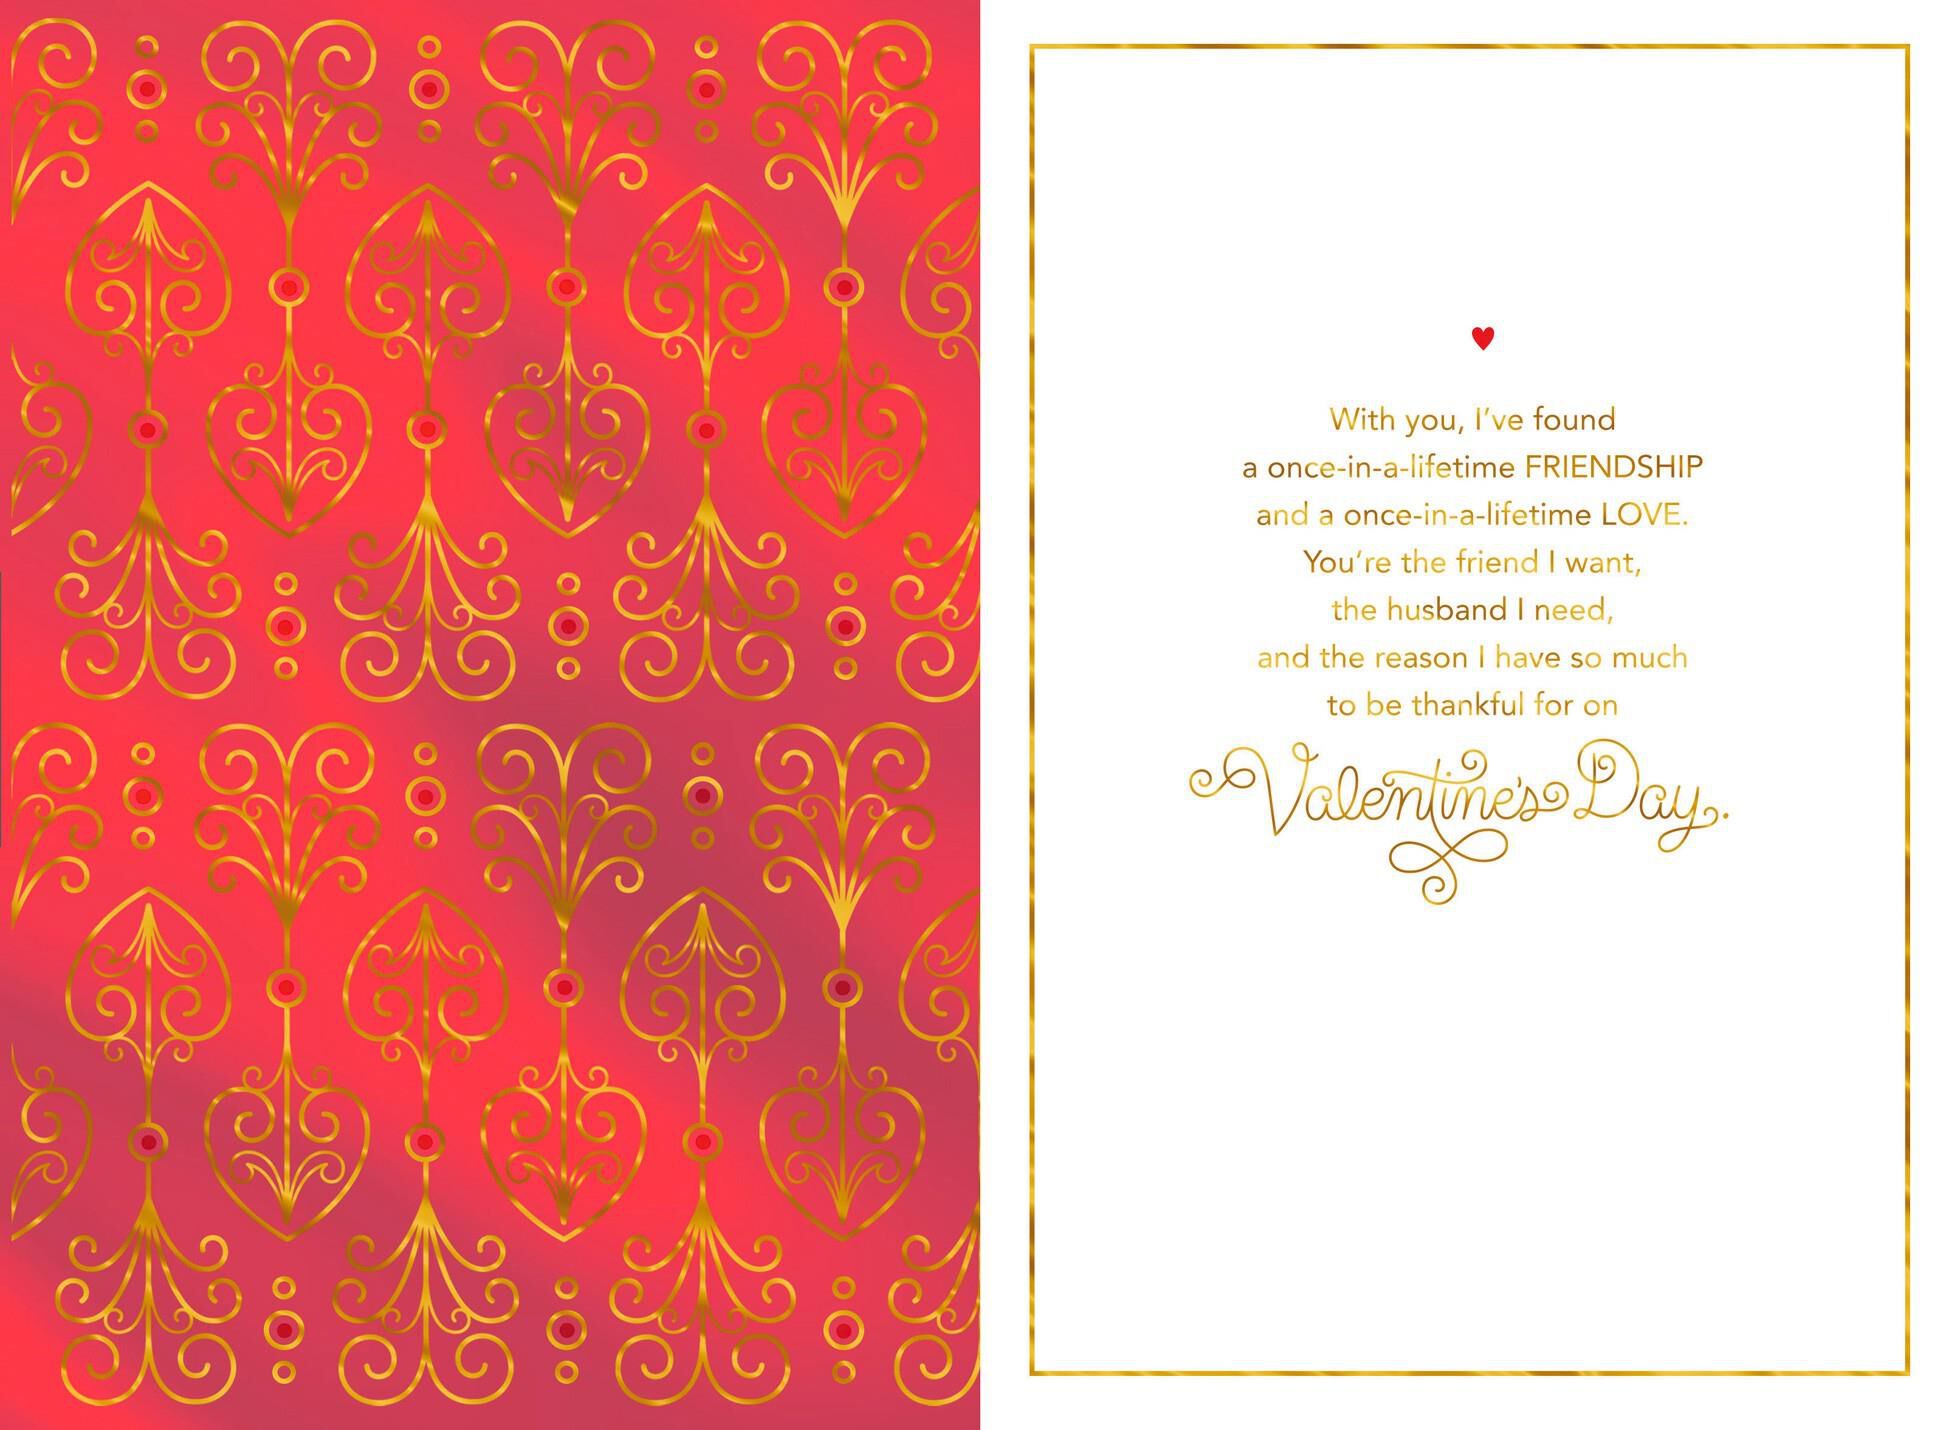 Gold Foil Scrollwork Valentine's Day Card for Husband - Greeting Cards - Hallmark1960 x 1430